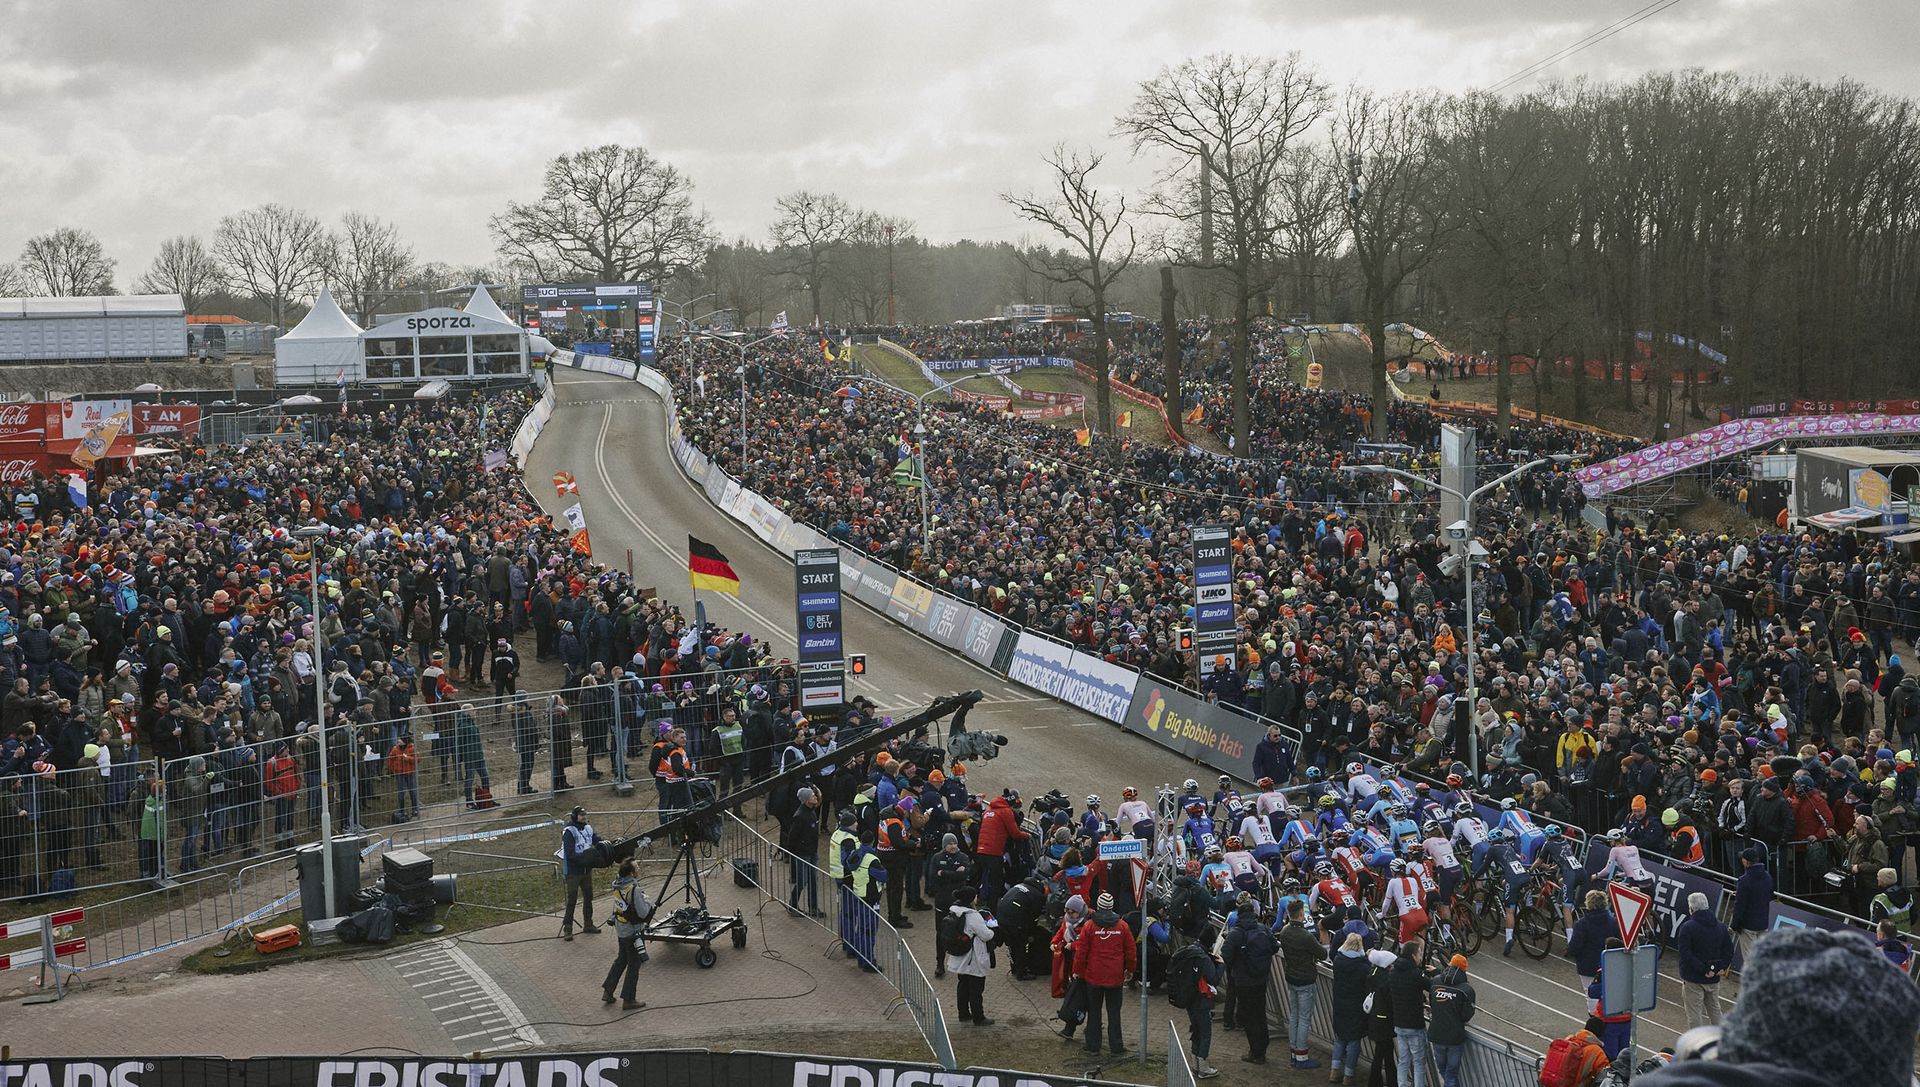 scenes from cx worlds in the netherlands the weekend of feb 4 and 5 2023